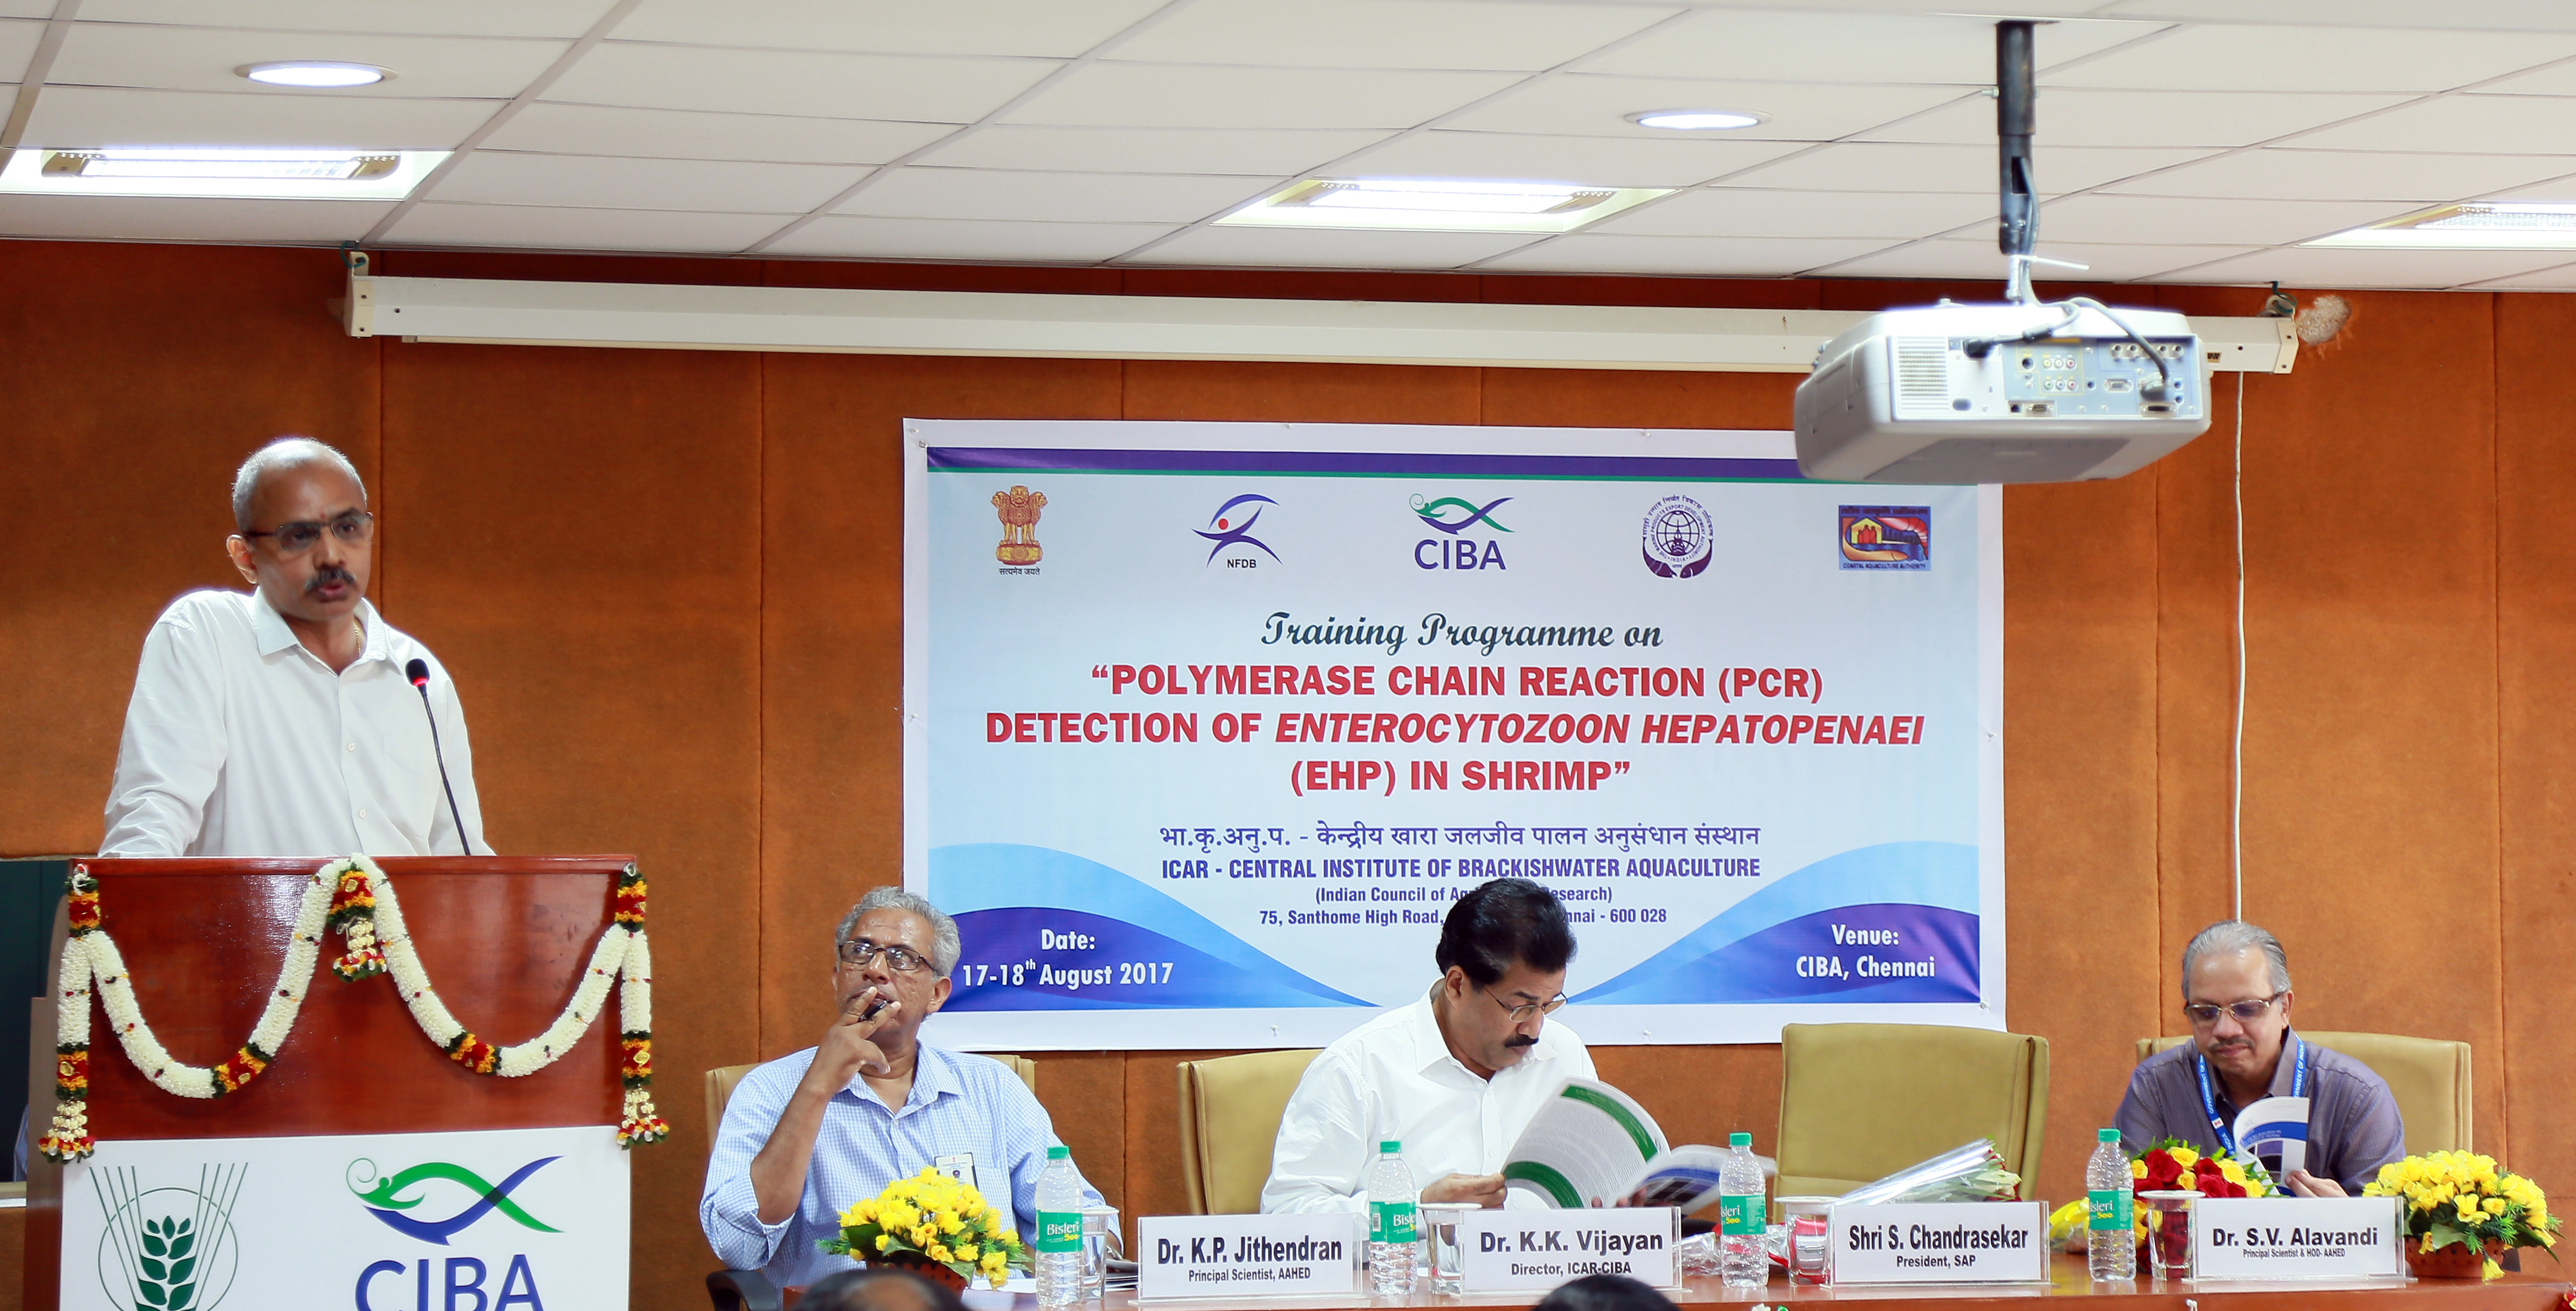 Sensitization Training programme on DNA based diagnostic “Polymerase Chain Reaction (PCR) detection of Enterocytozoon hepatopenaei (EHP) in shrimp” for the stakeholders of shrimp-farming sector conducted at ICAR-CIBA, Chennai 17th & 18th August 2017